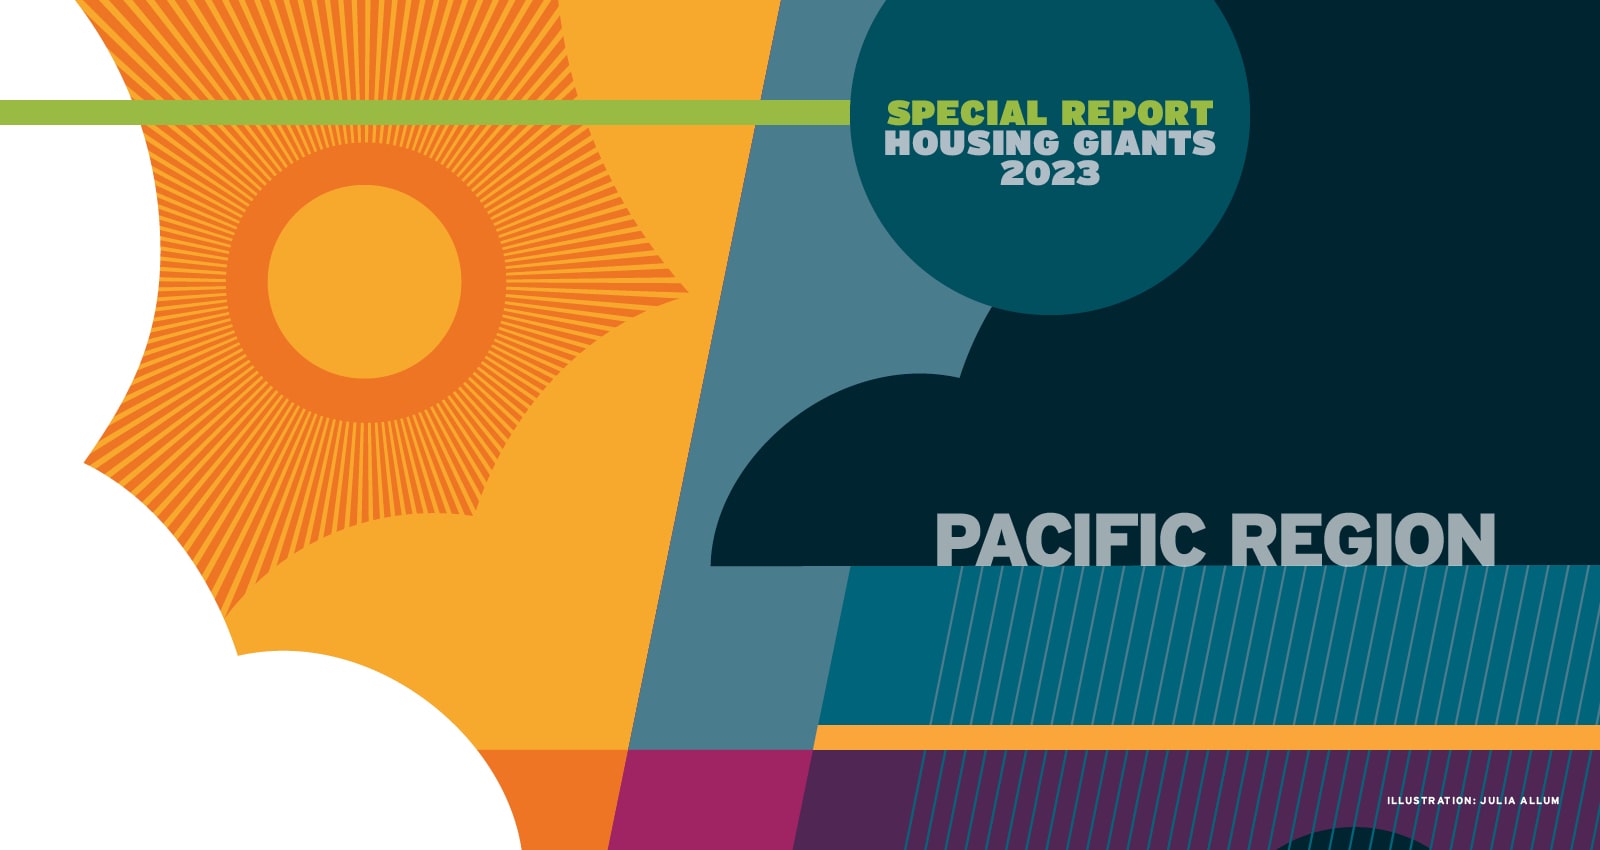 2023 Housing Giants ranked list of top builders in the Pacific region